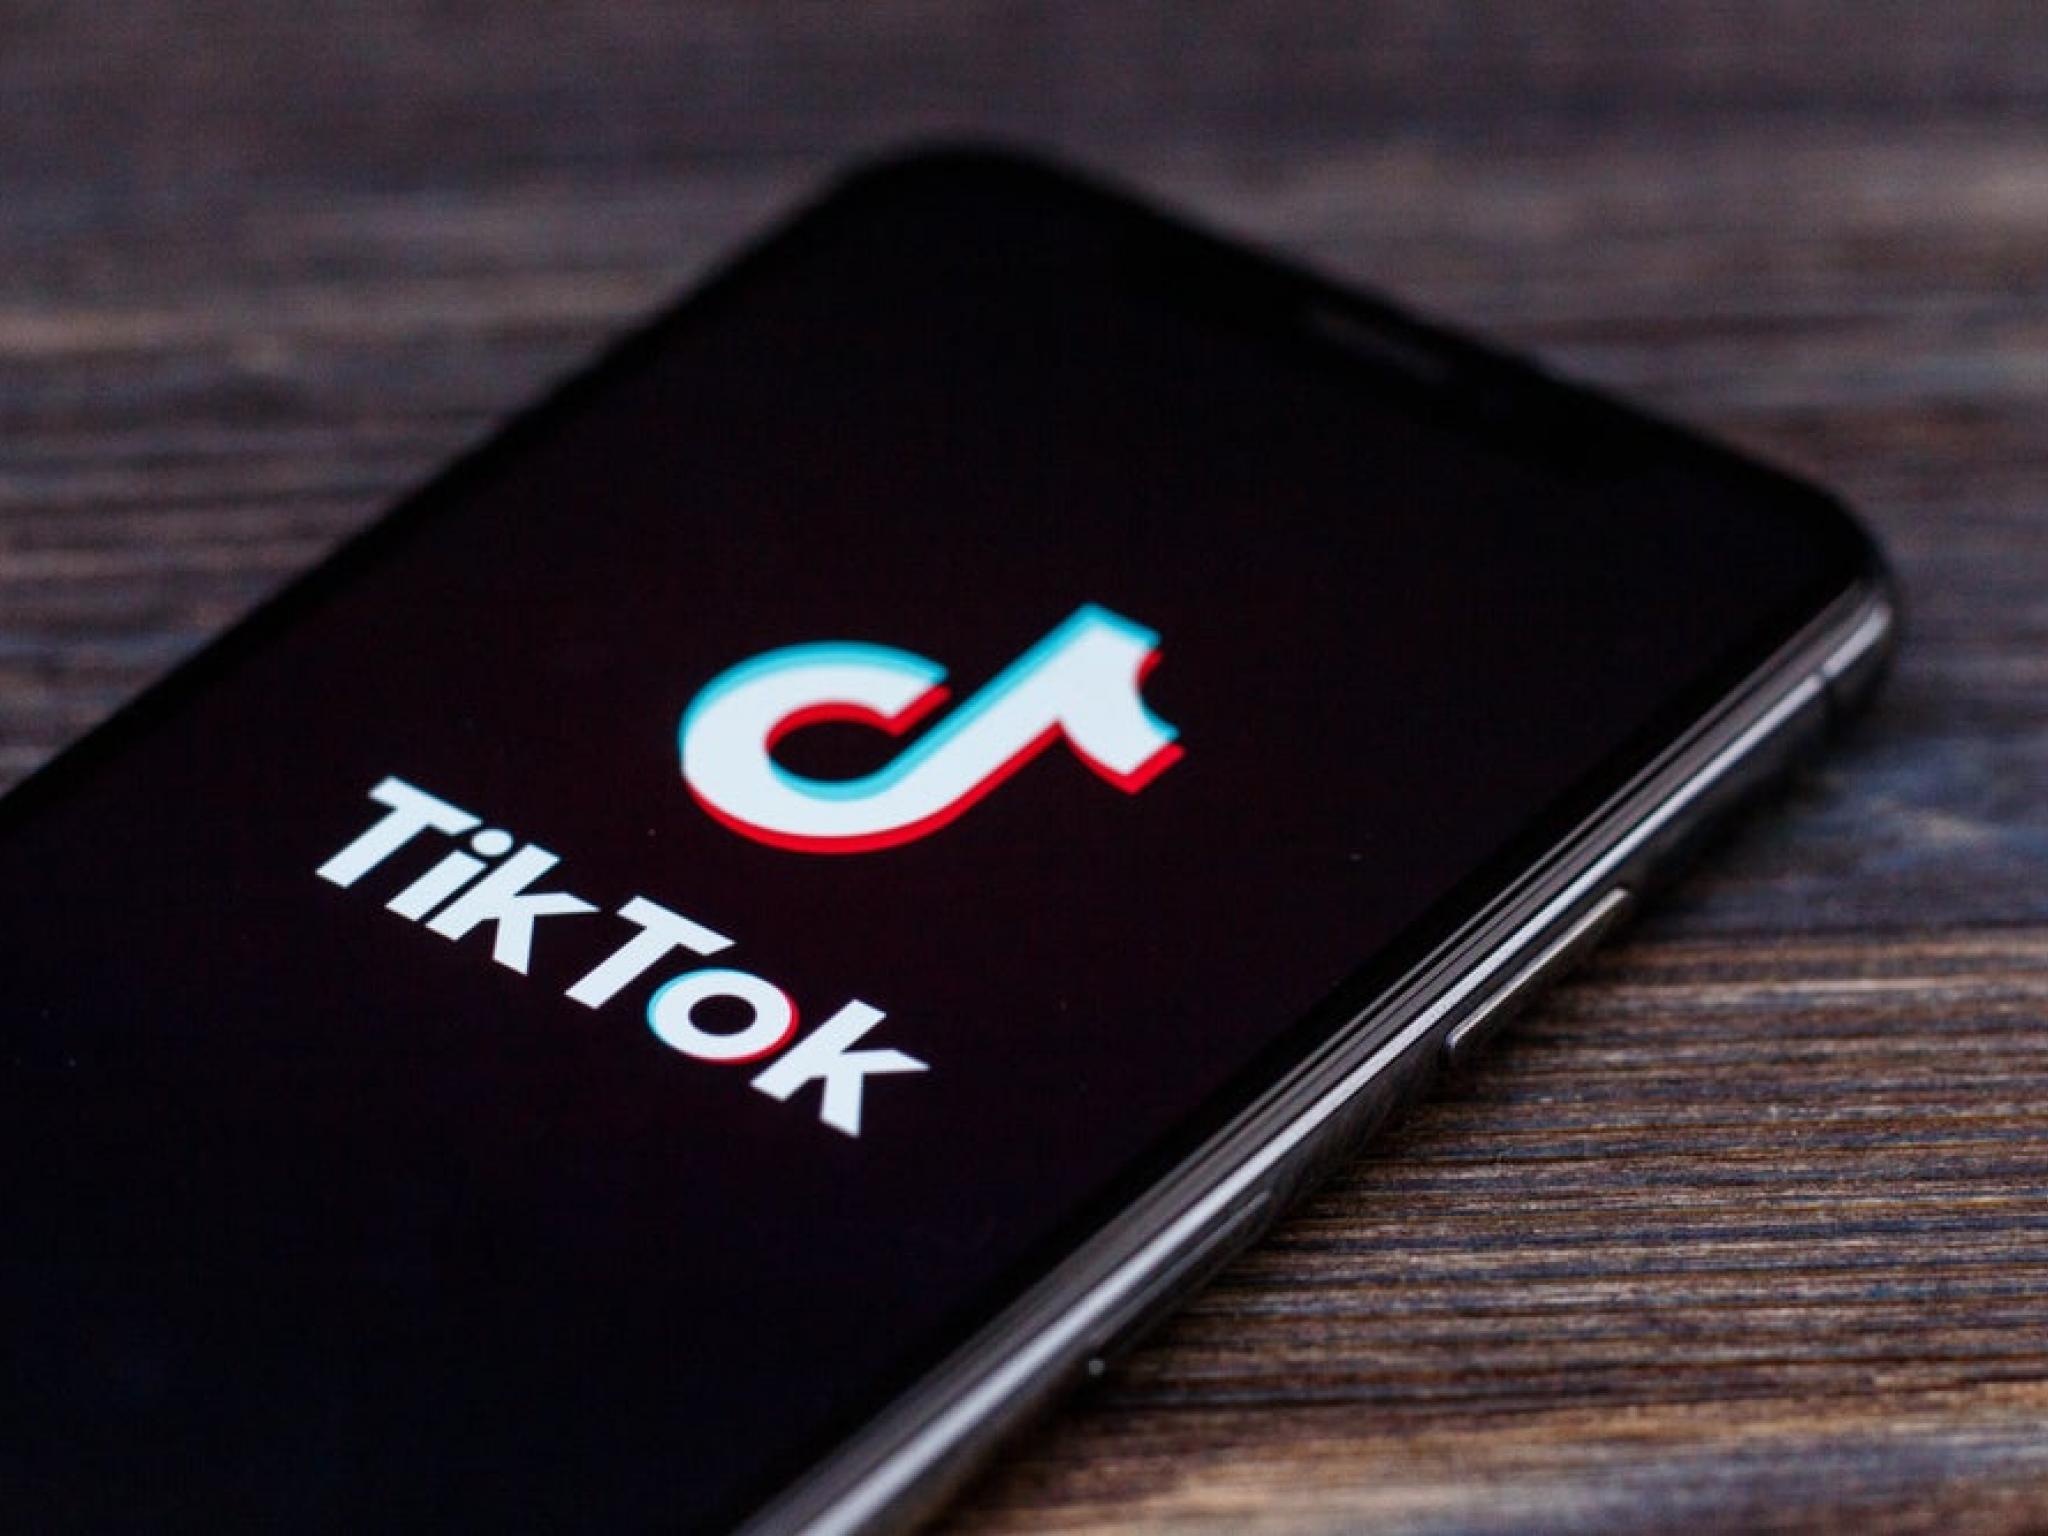  tiktok-parent-bytedances-profits-rise-60-year-over-year-as-company-grapples-with-potential-us-ban 